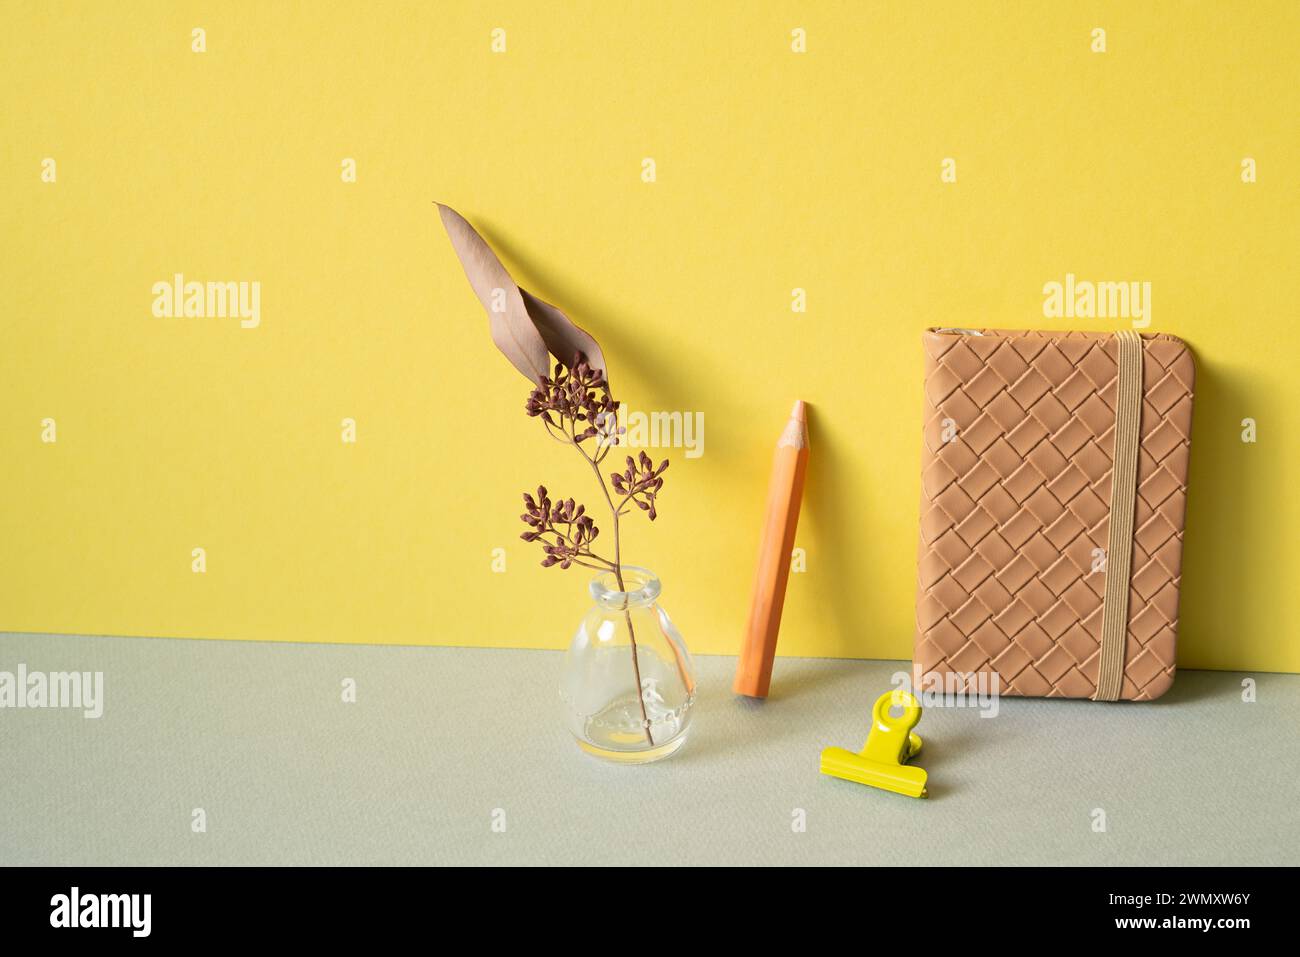 Diary notebook, colored pencil, clip, vase of dry flower on gray desk. yellow wall background. workspace Stock Photo